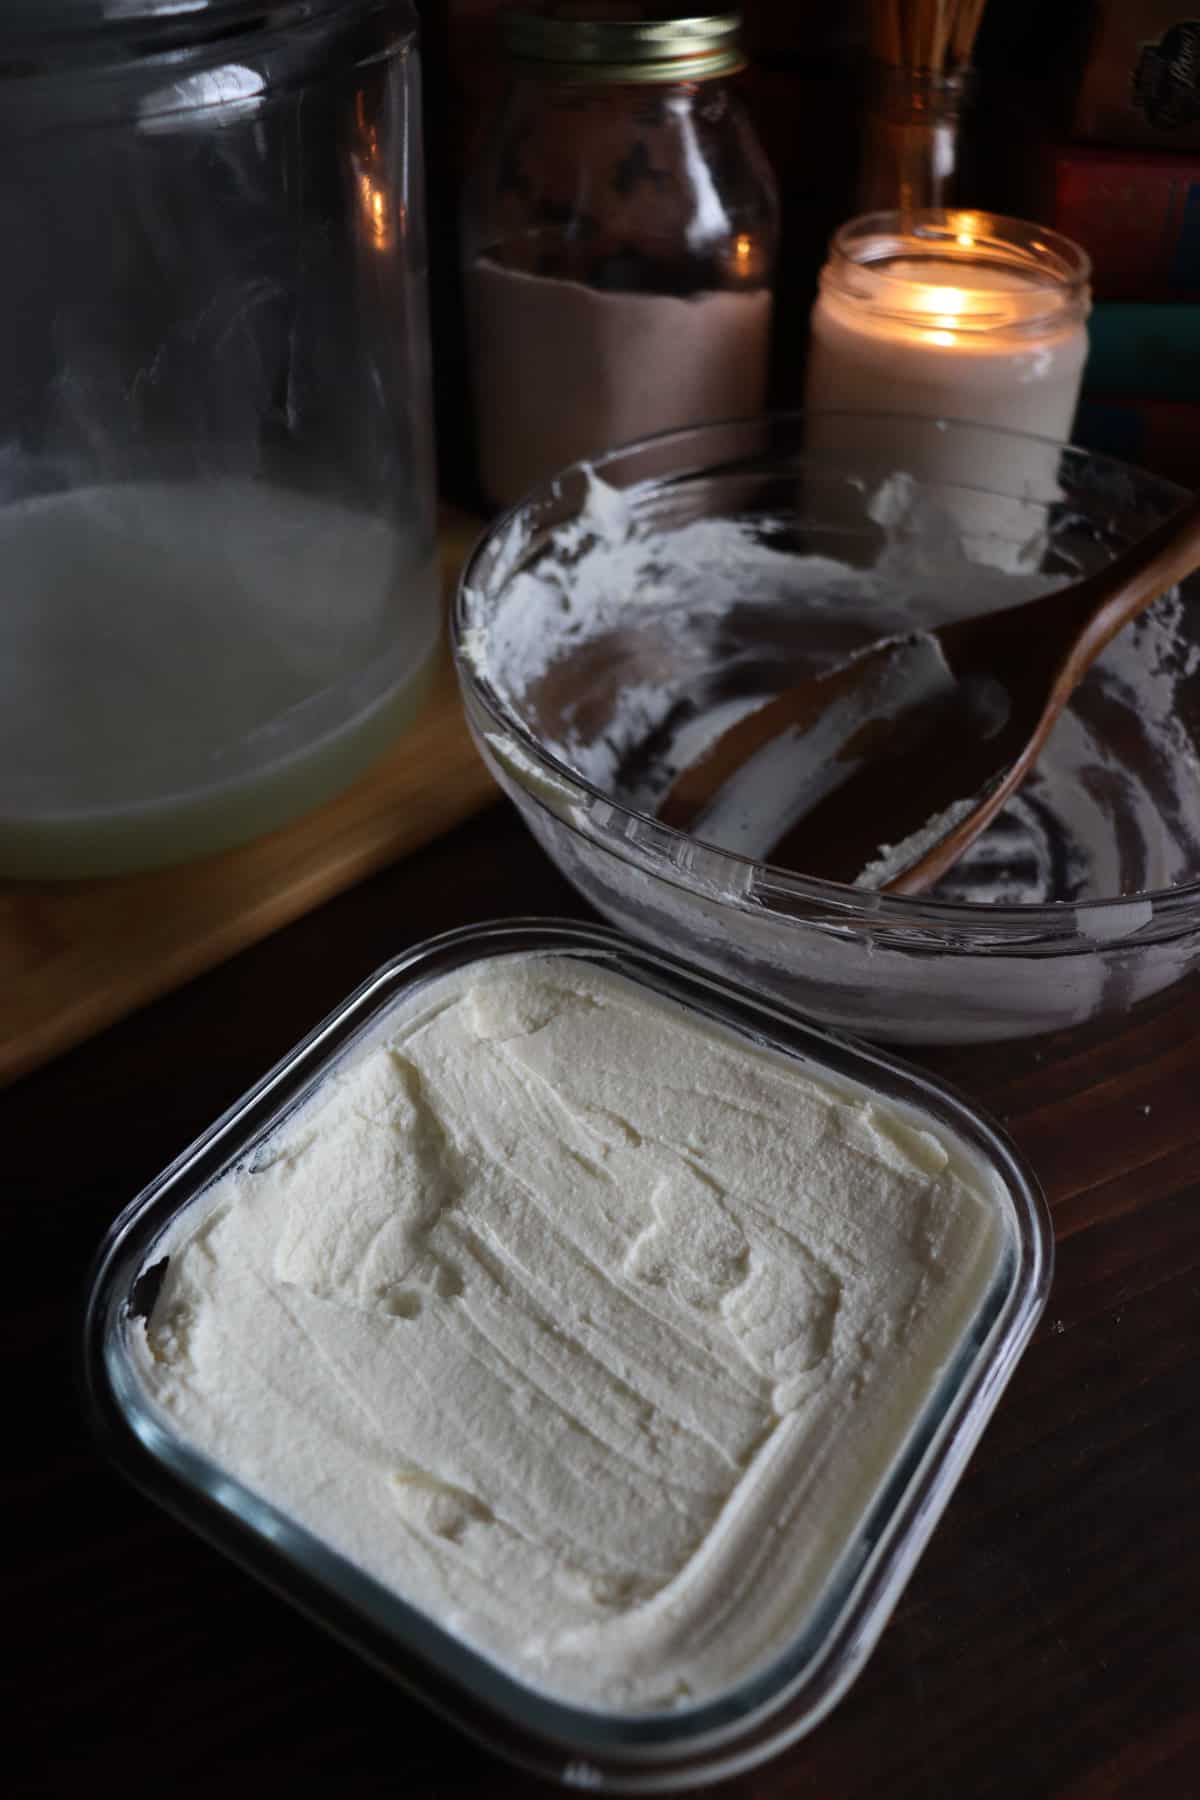 cream cheese in a glass container next to the bowl it was just in and a wooden spoon. the whey is still in the big glass jar it was dripping in. a candle is lit behind it all.